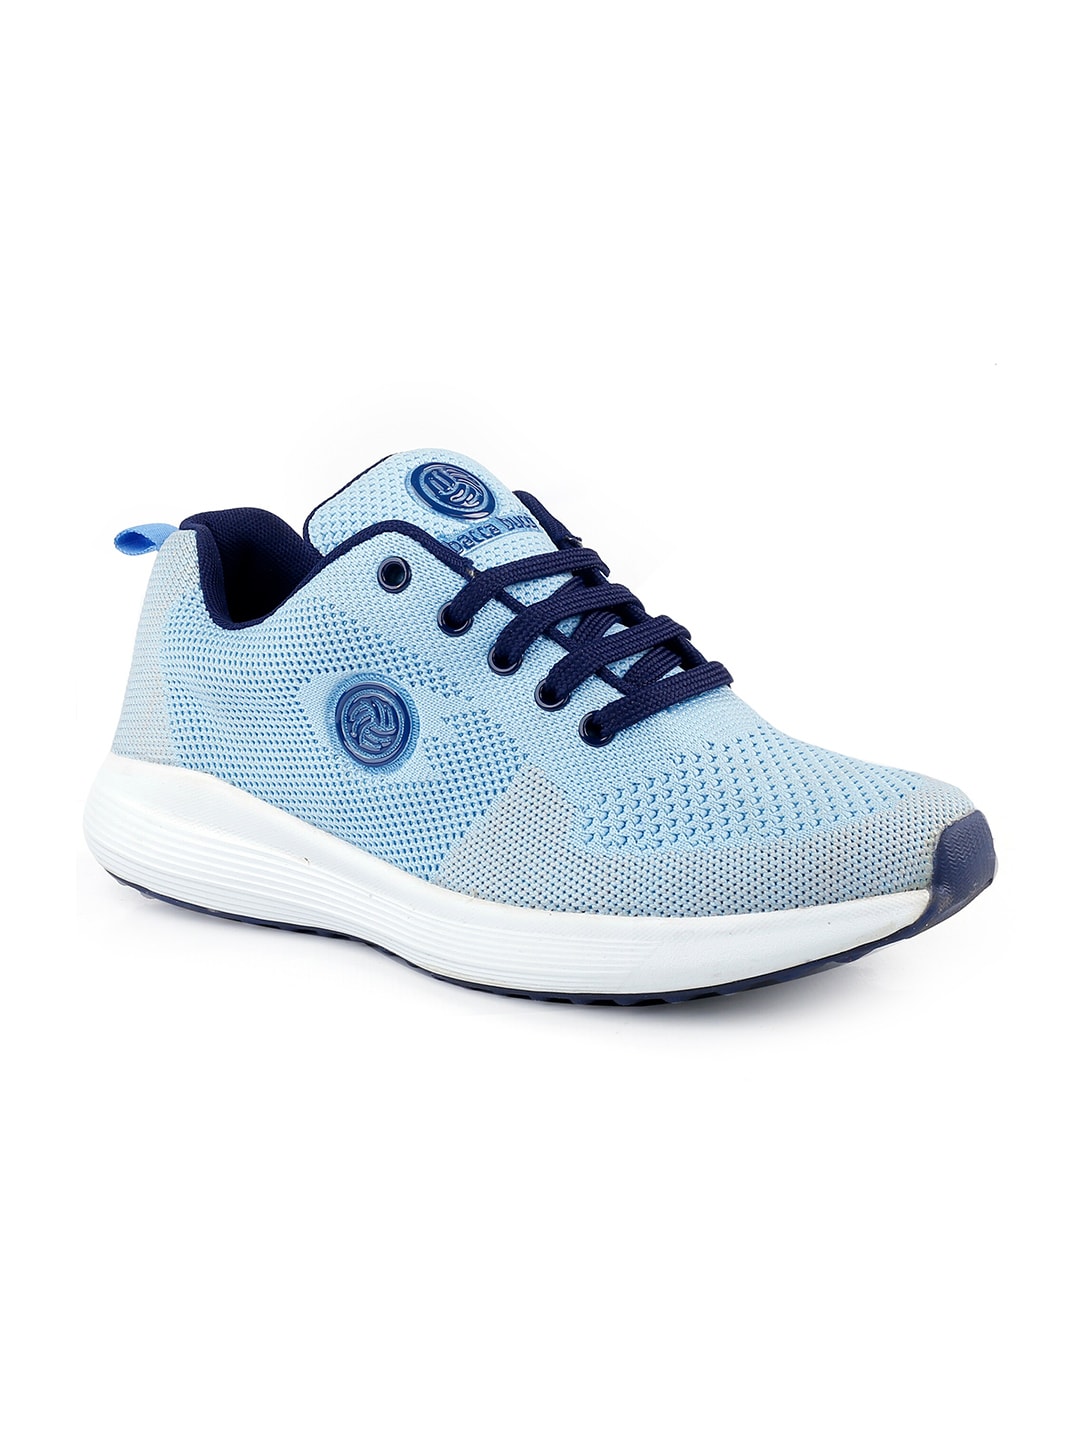 bacca bucci Women Turquoise Blue Mesh Running Non-Marking Shoes Price in India